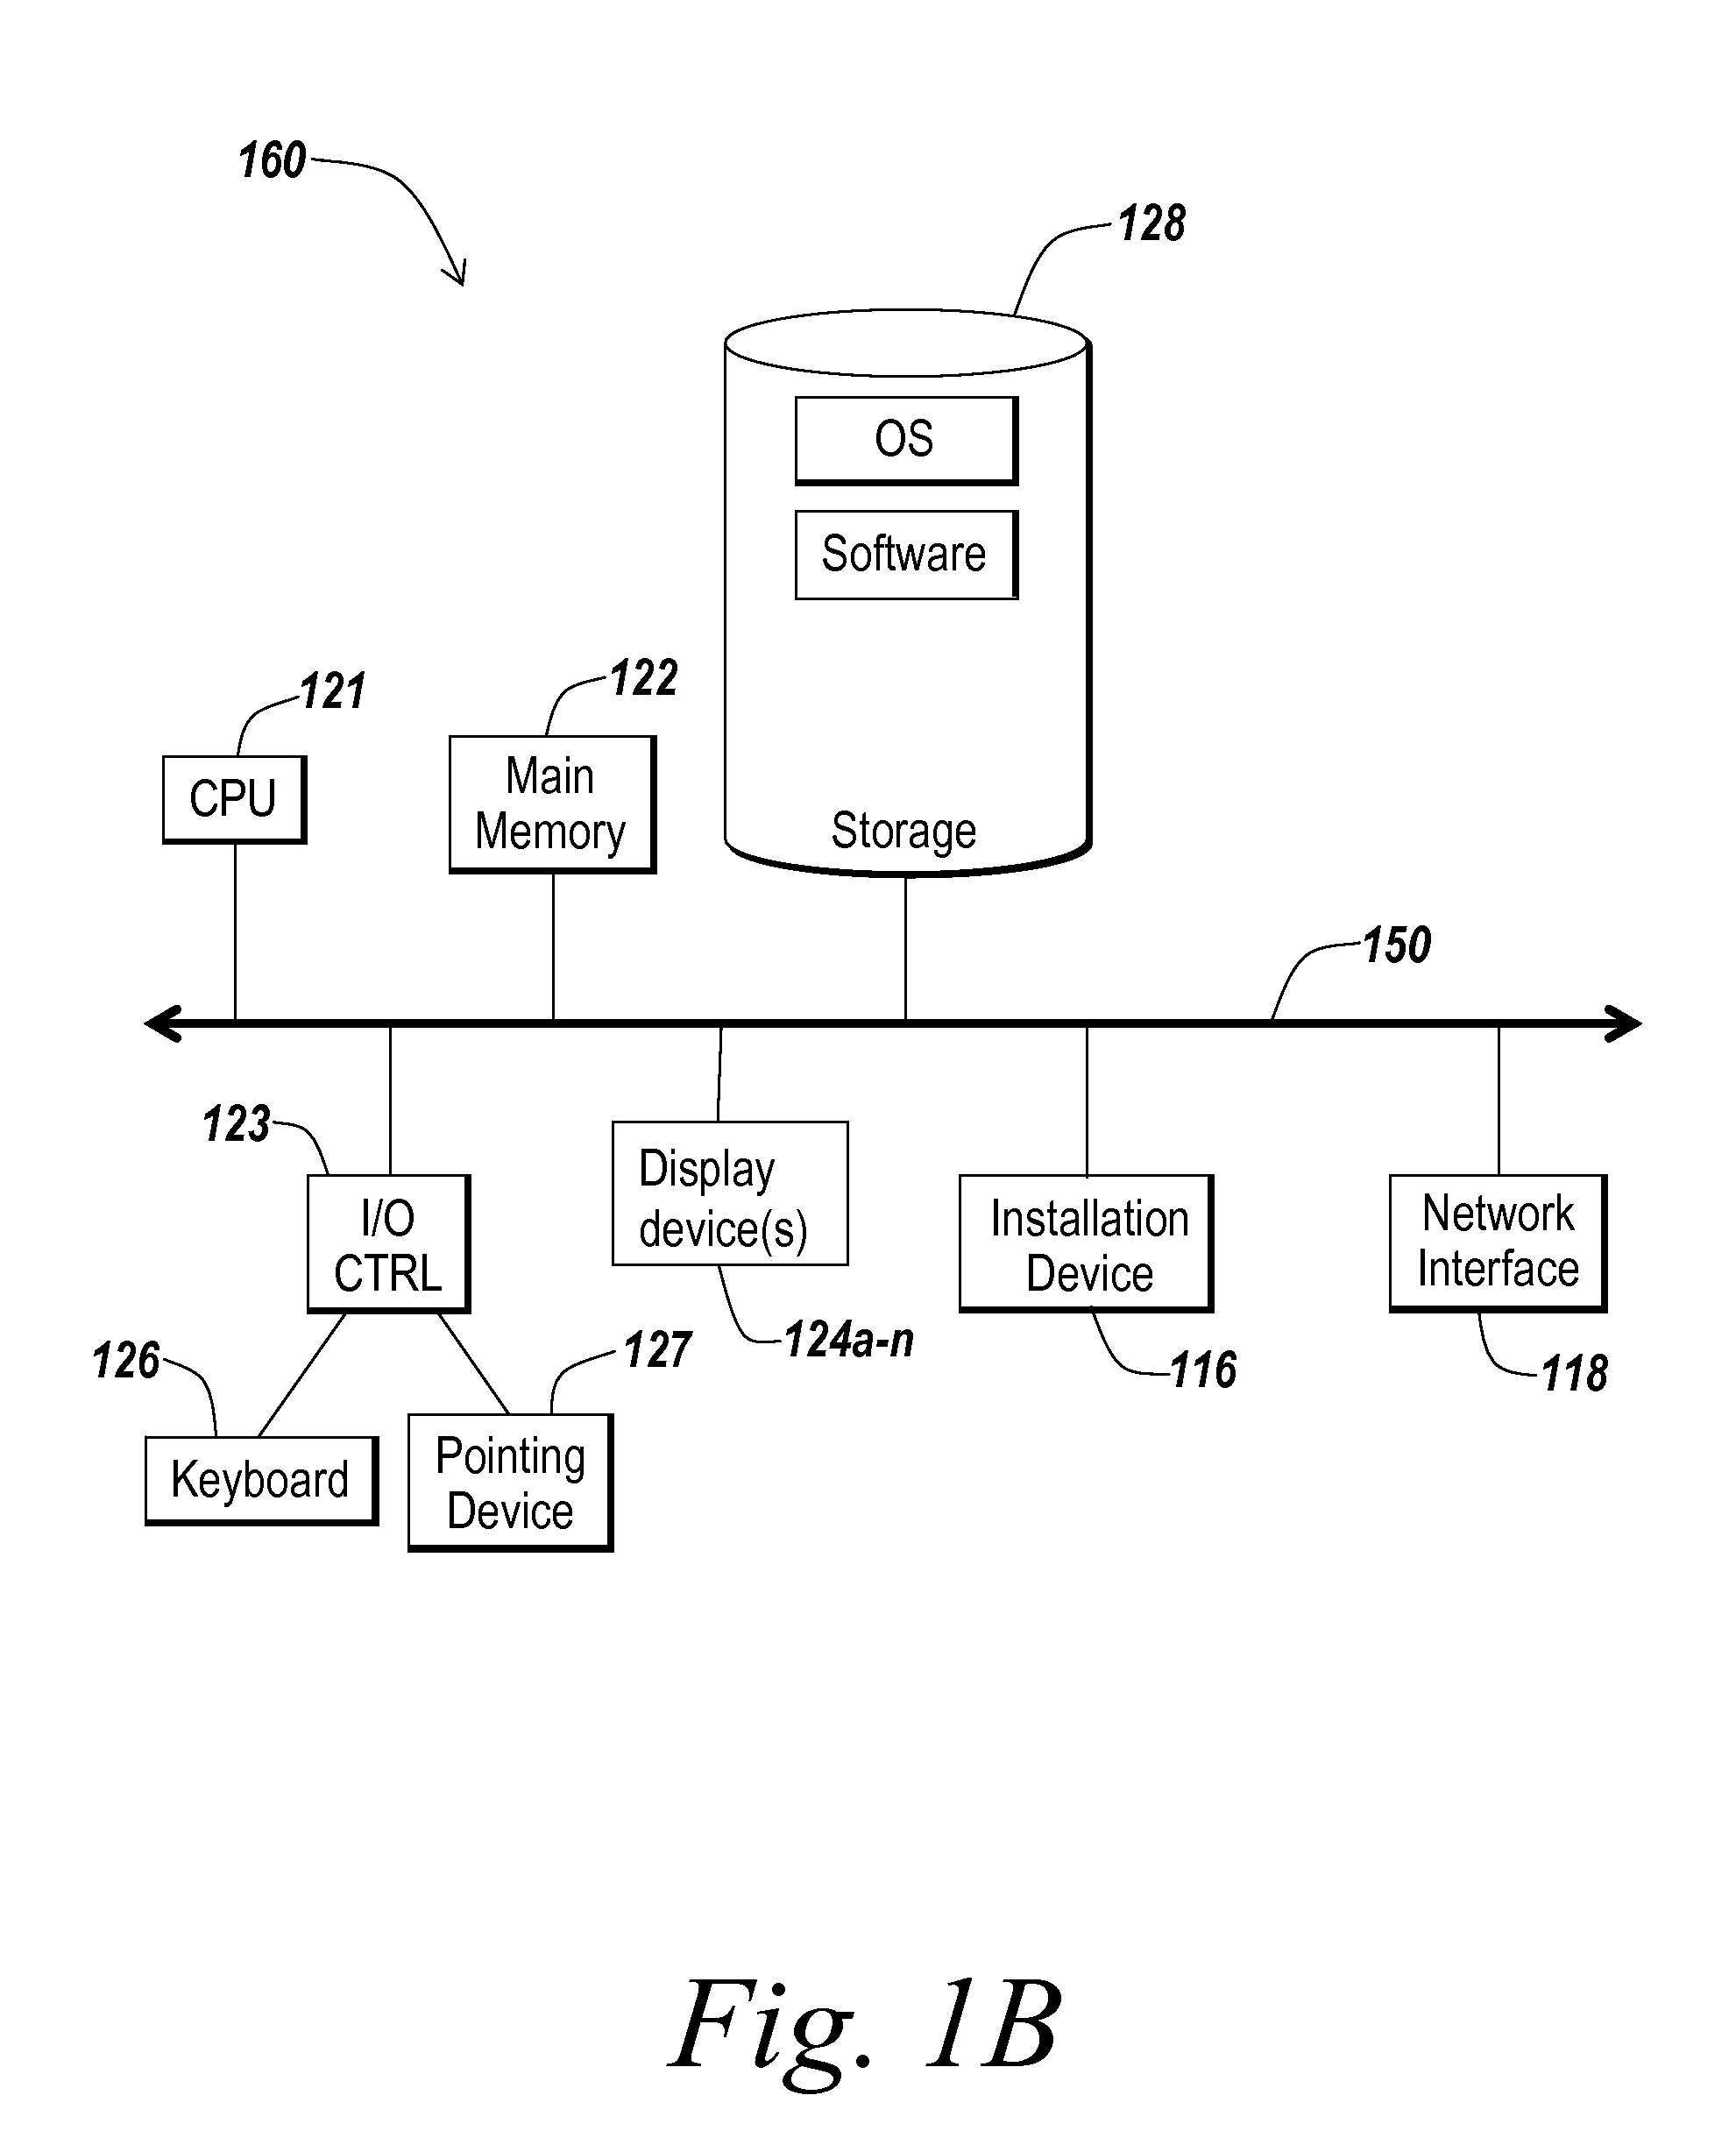 Systems and methods for automatic spell checking of dynamically generated web pages